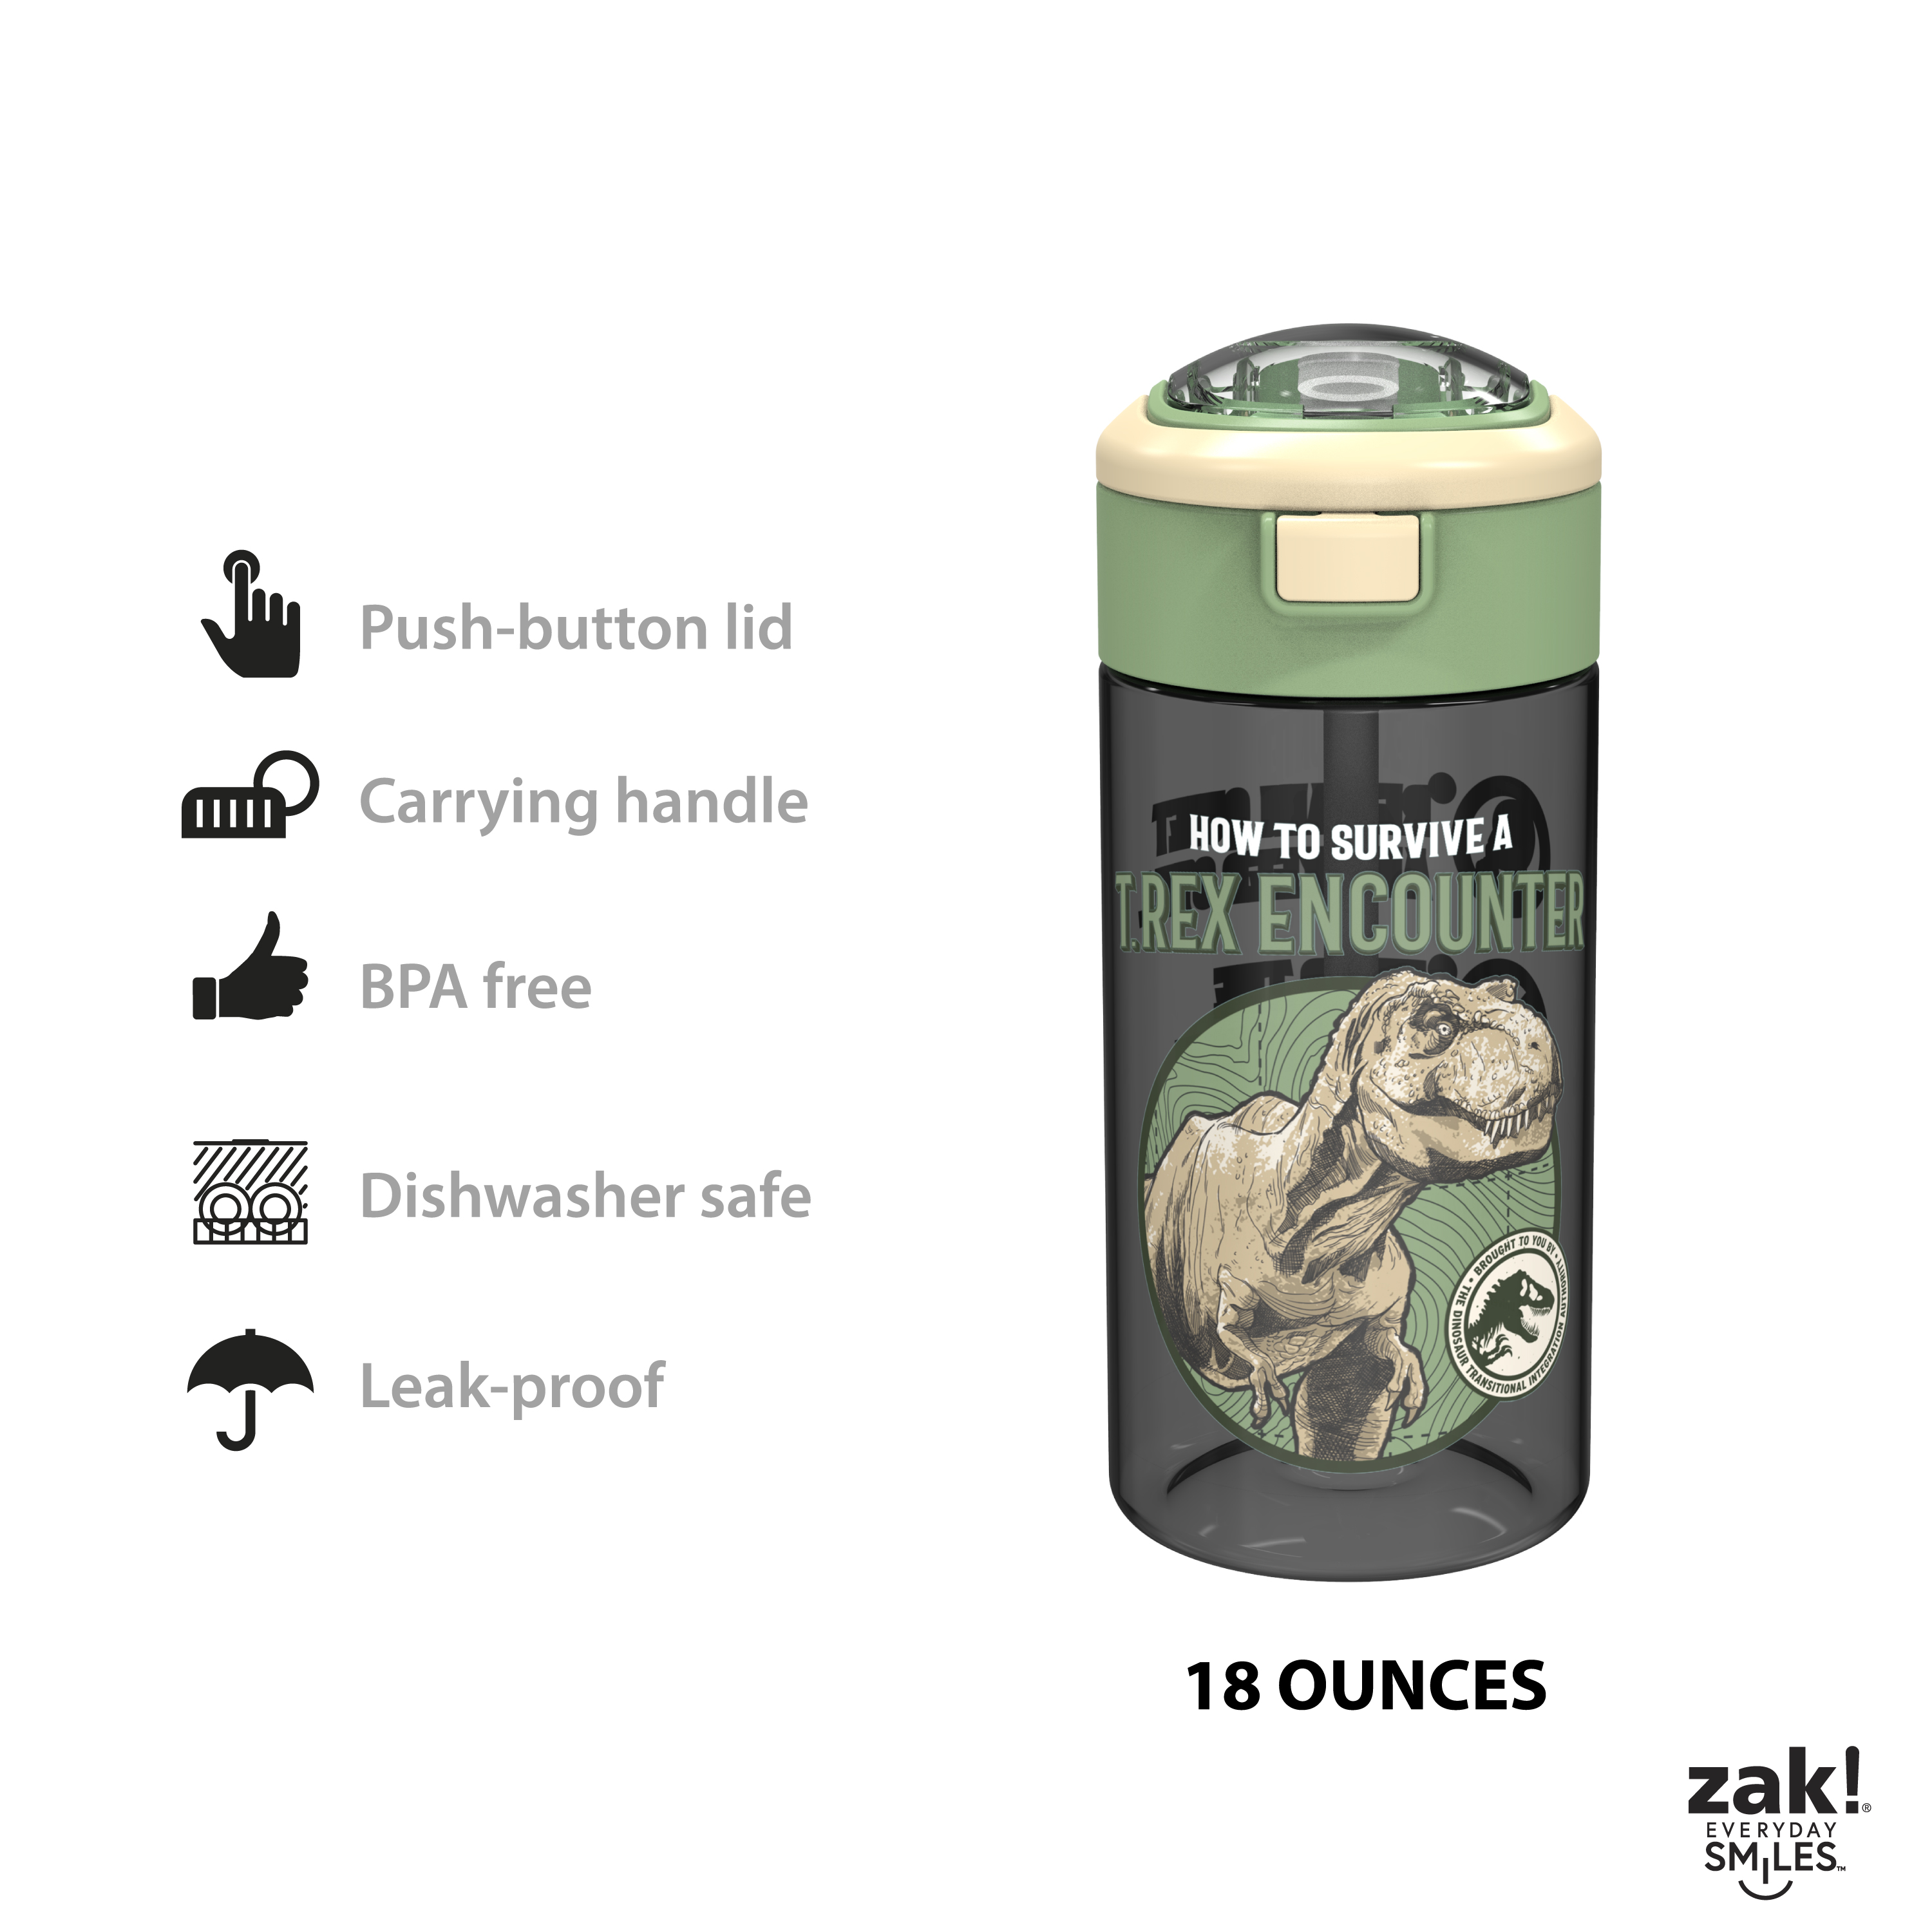 Jurassic World Dominion 18 ounce Reusable Plastic Water Bottle with Push-button lid, How to Survive a T-Rex Encounter, 2-piece set slideshow image 9